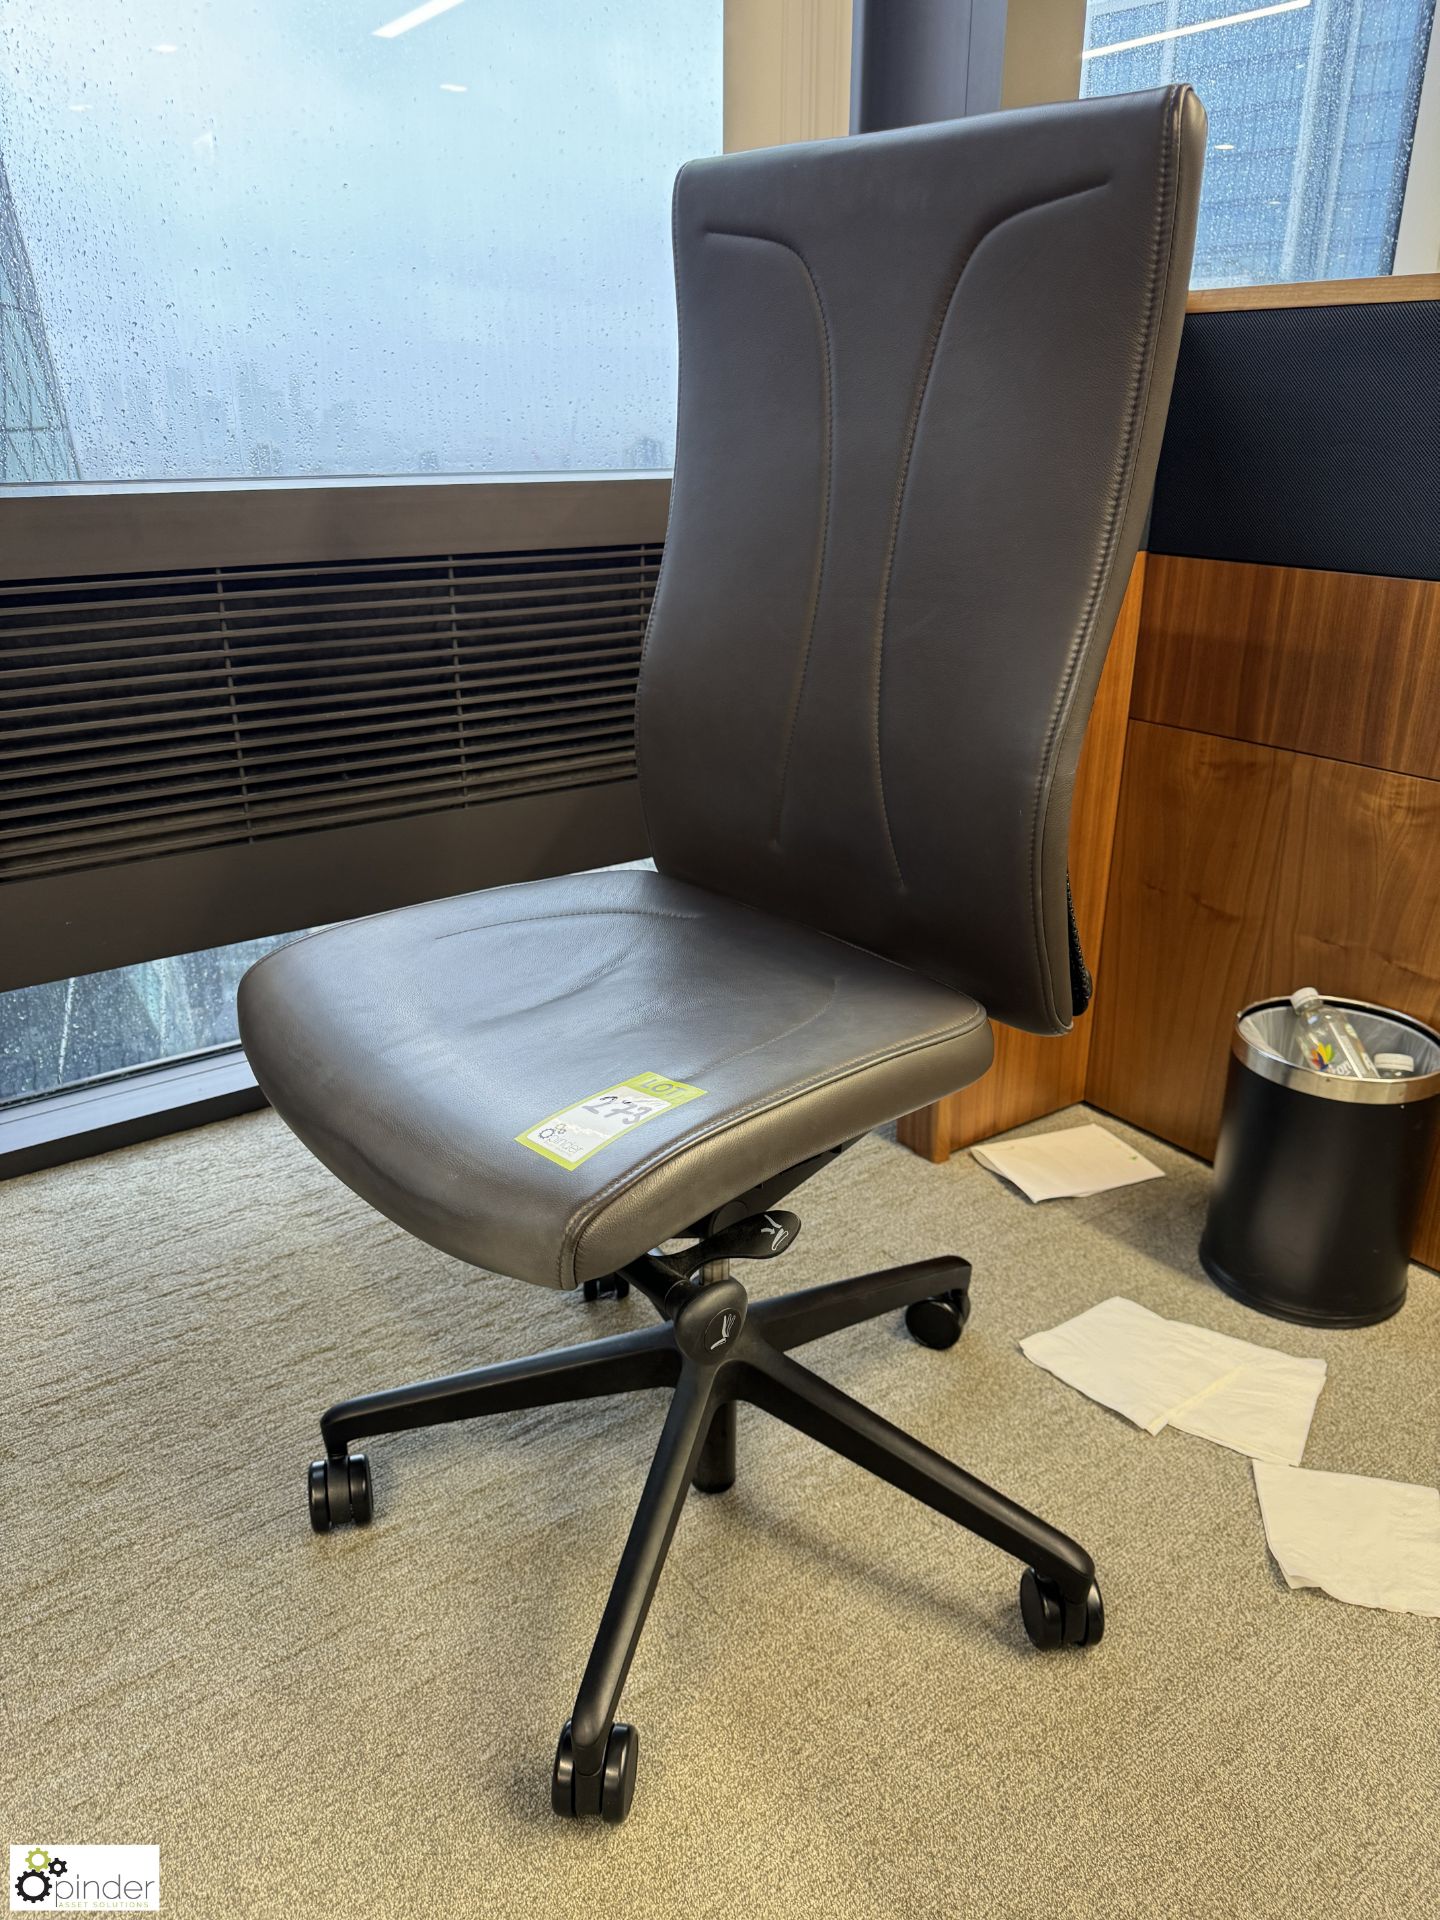 Senator leather swivel Office Chair, dark brown (location in building – level 22) - Image 2 of 4